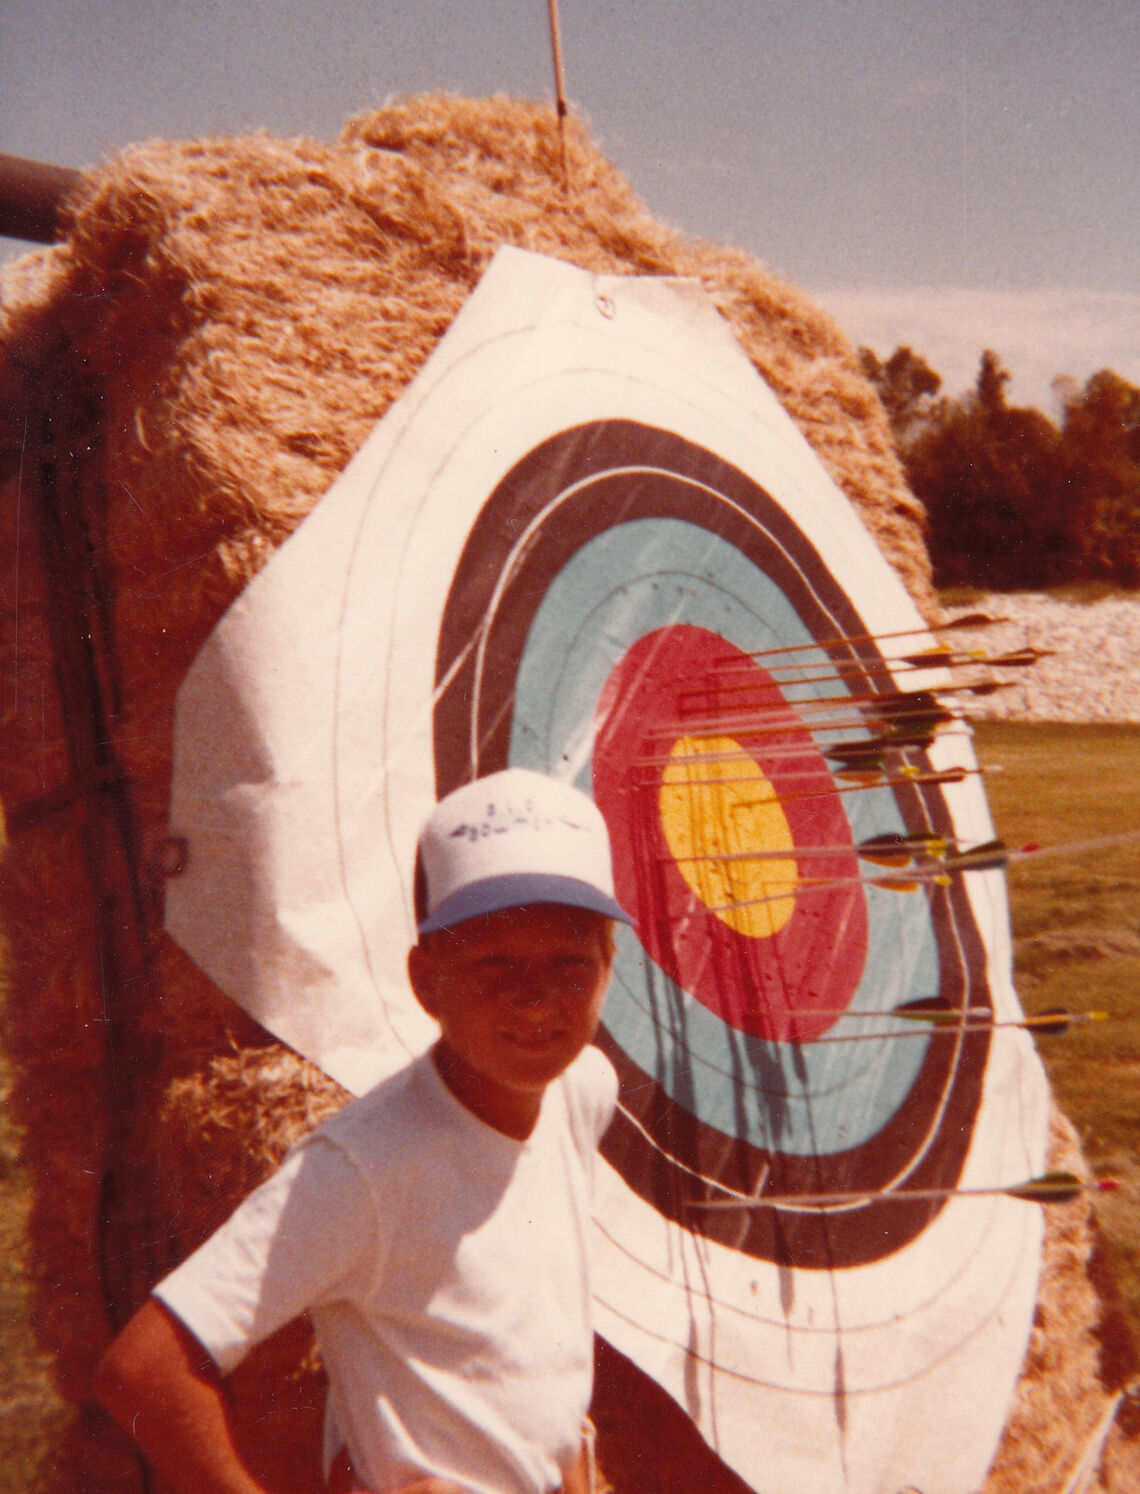 Allen Rasor at the target at a young age.